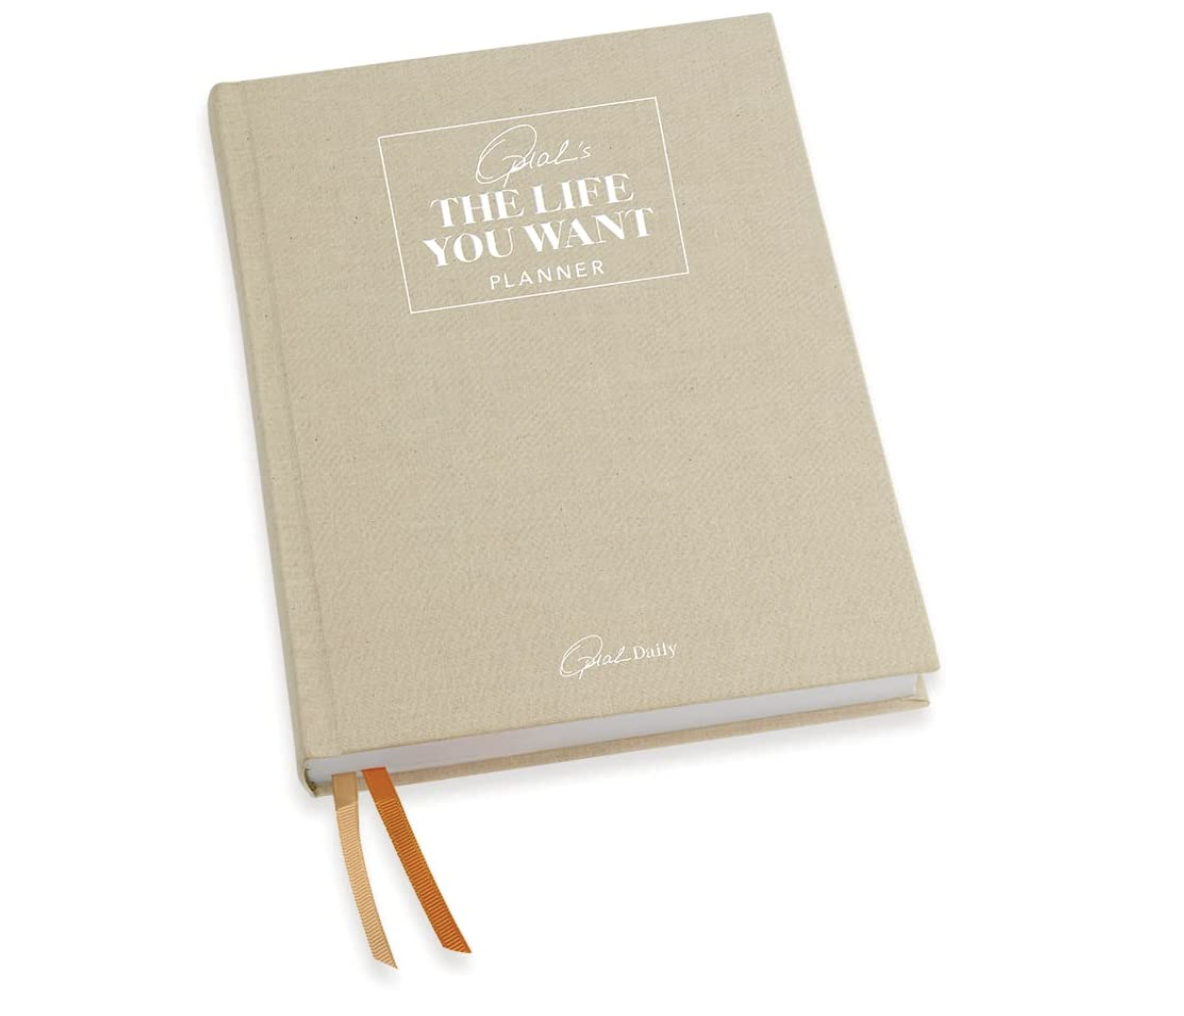 Oprah's The Life You Want™ Planner